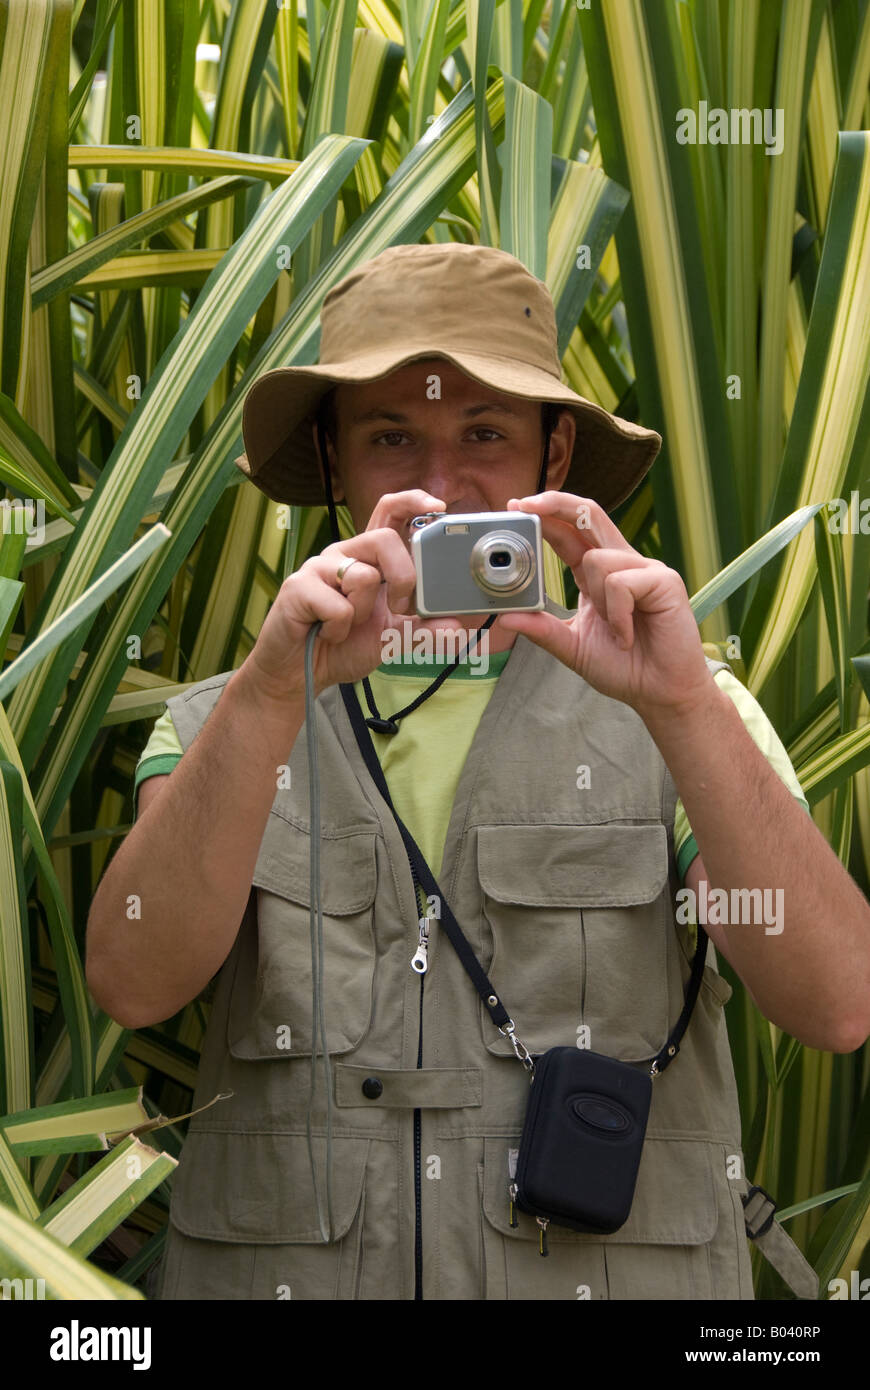 a young man taking photographs in a forest Stock Photo